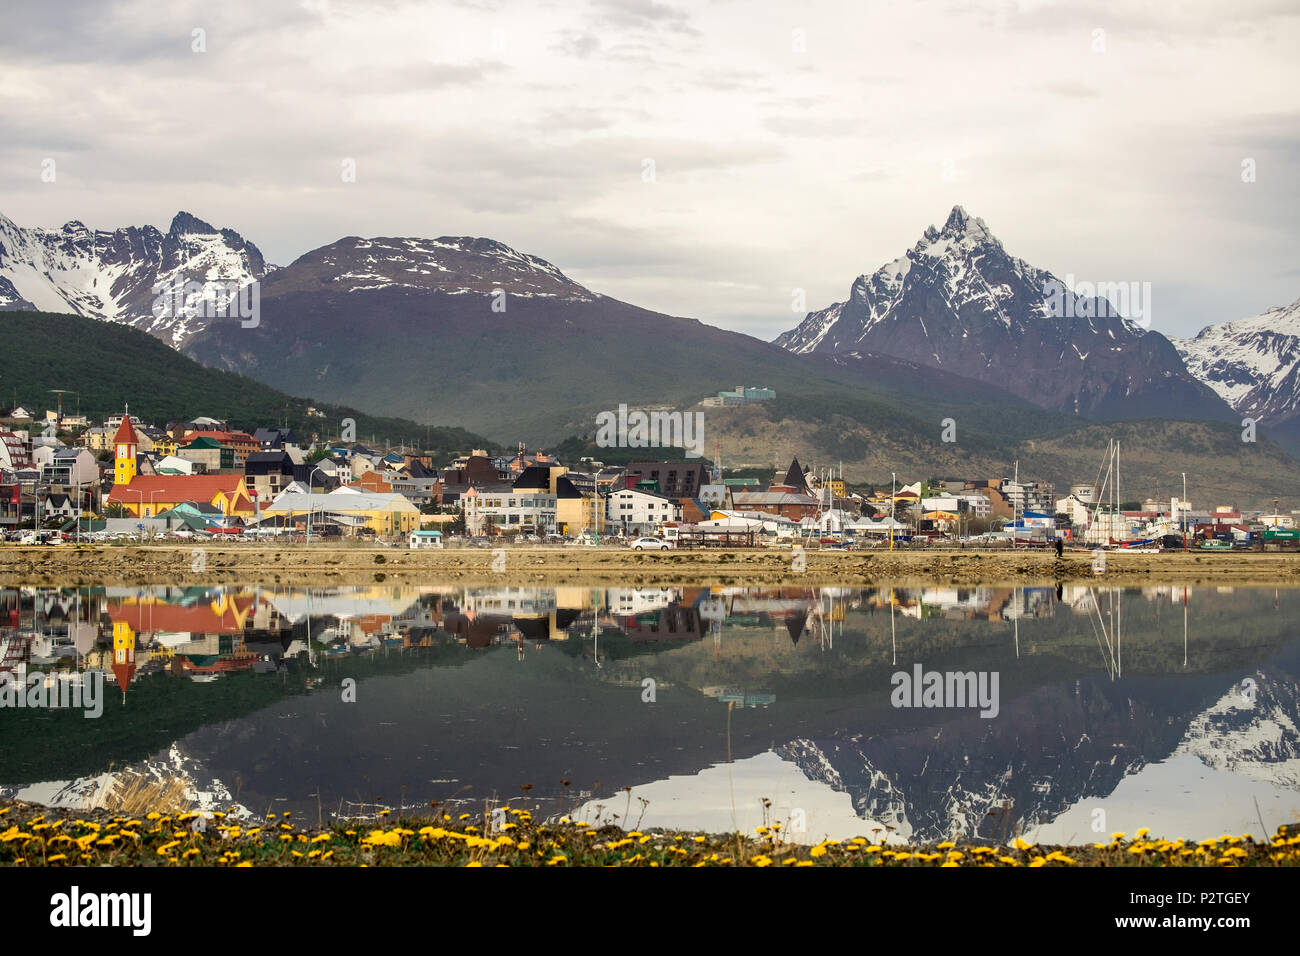 The 'Bahía Encerrada' mirrors the city of Ushuaia and its surrounding mountains. The scenery of this southernmost city is extraordinary. Stock Photo